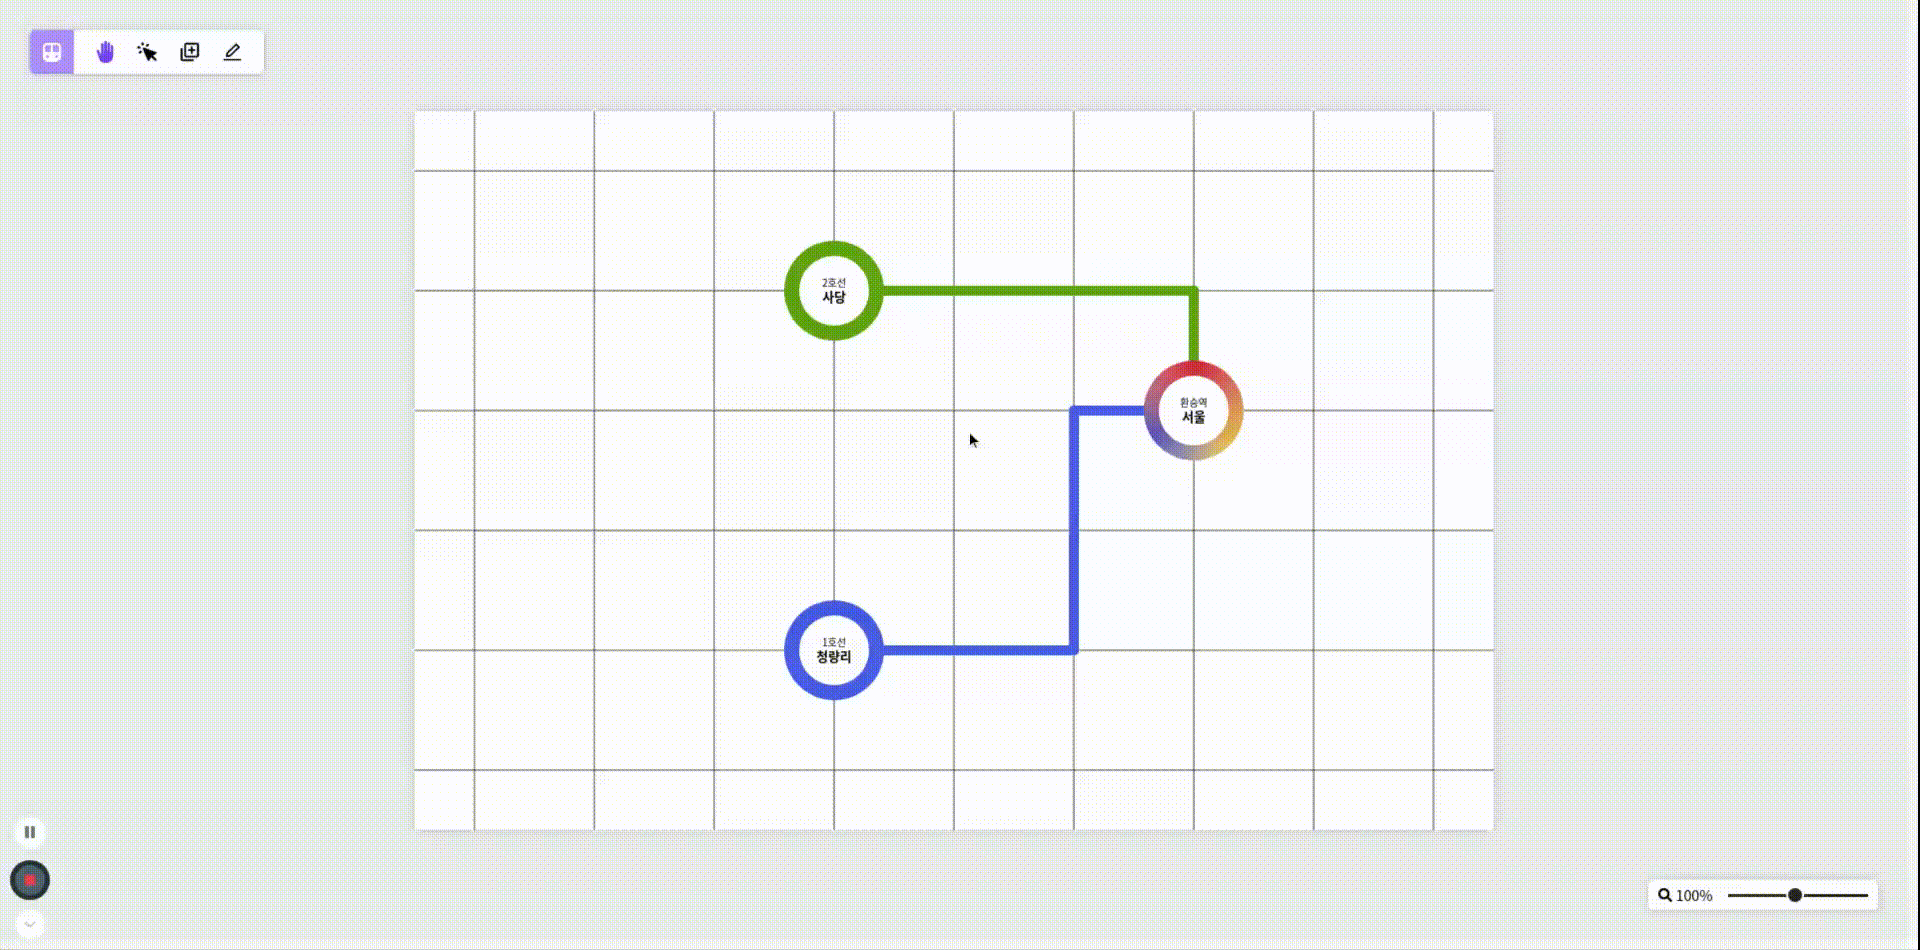 train-map-visualizer-side-project-midterm-review-10.gif